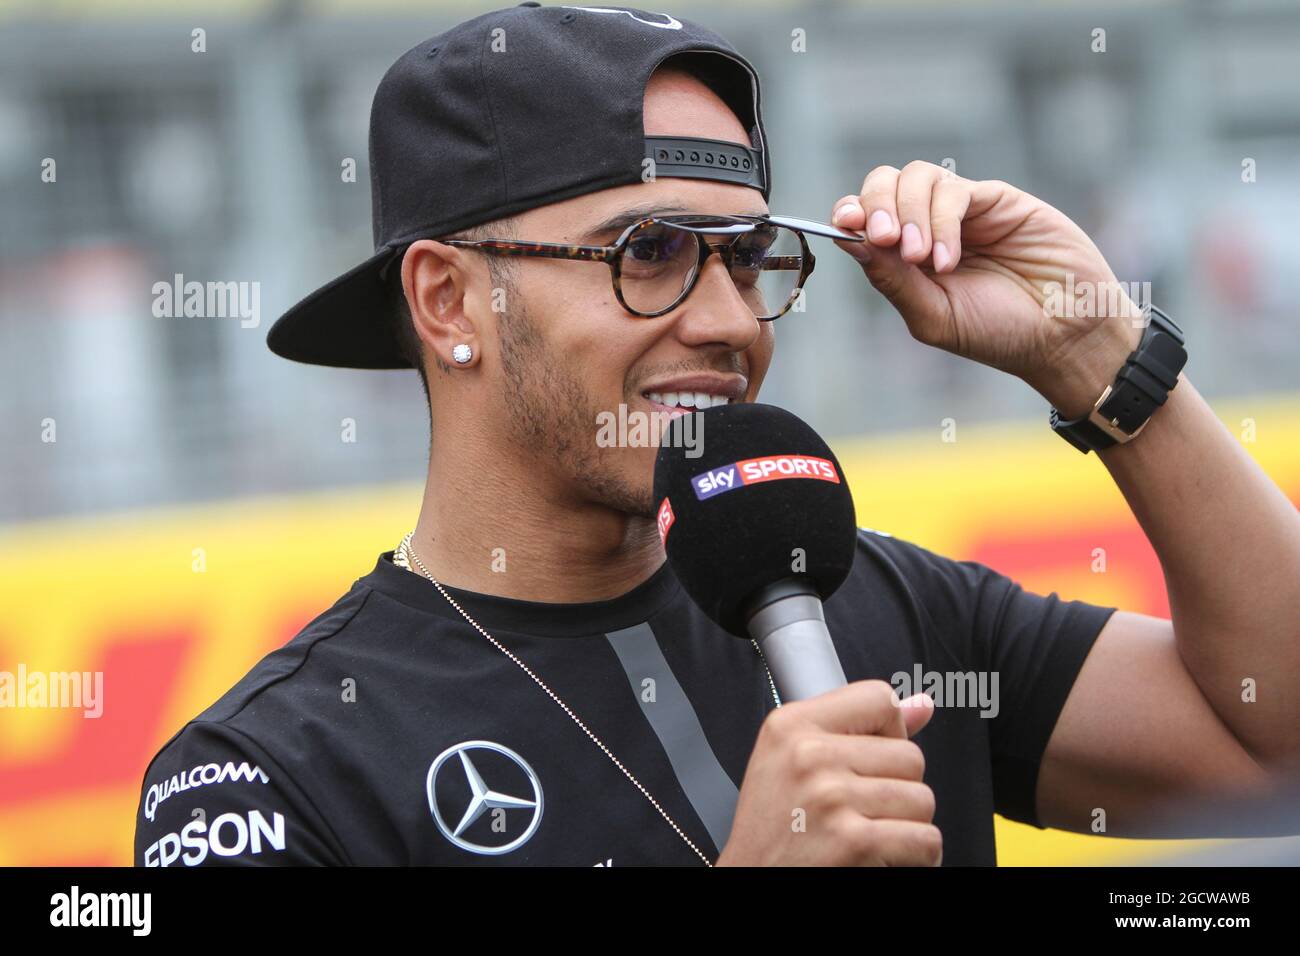 Lewis Hamilton: What Sunglasses Do F1 Drivers Wear? - All About Vision